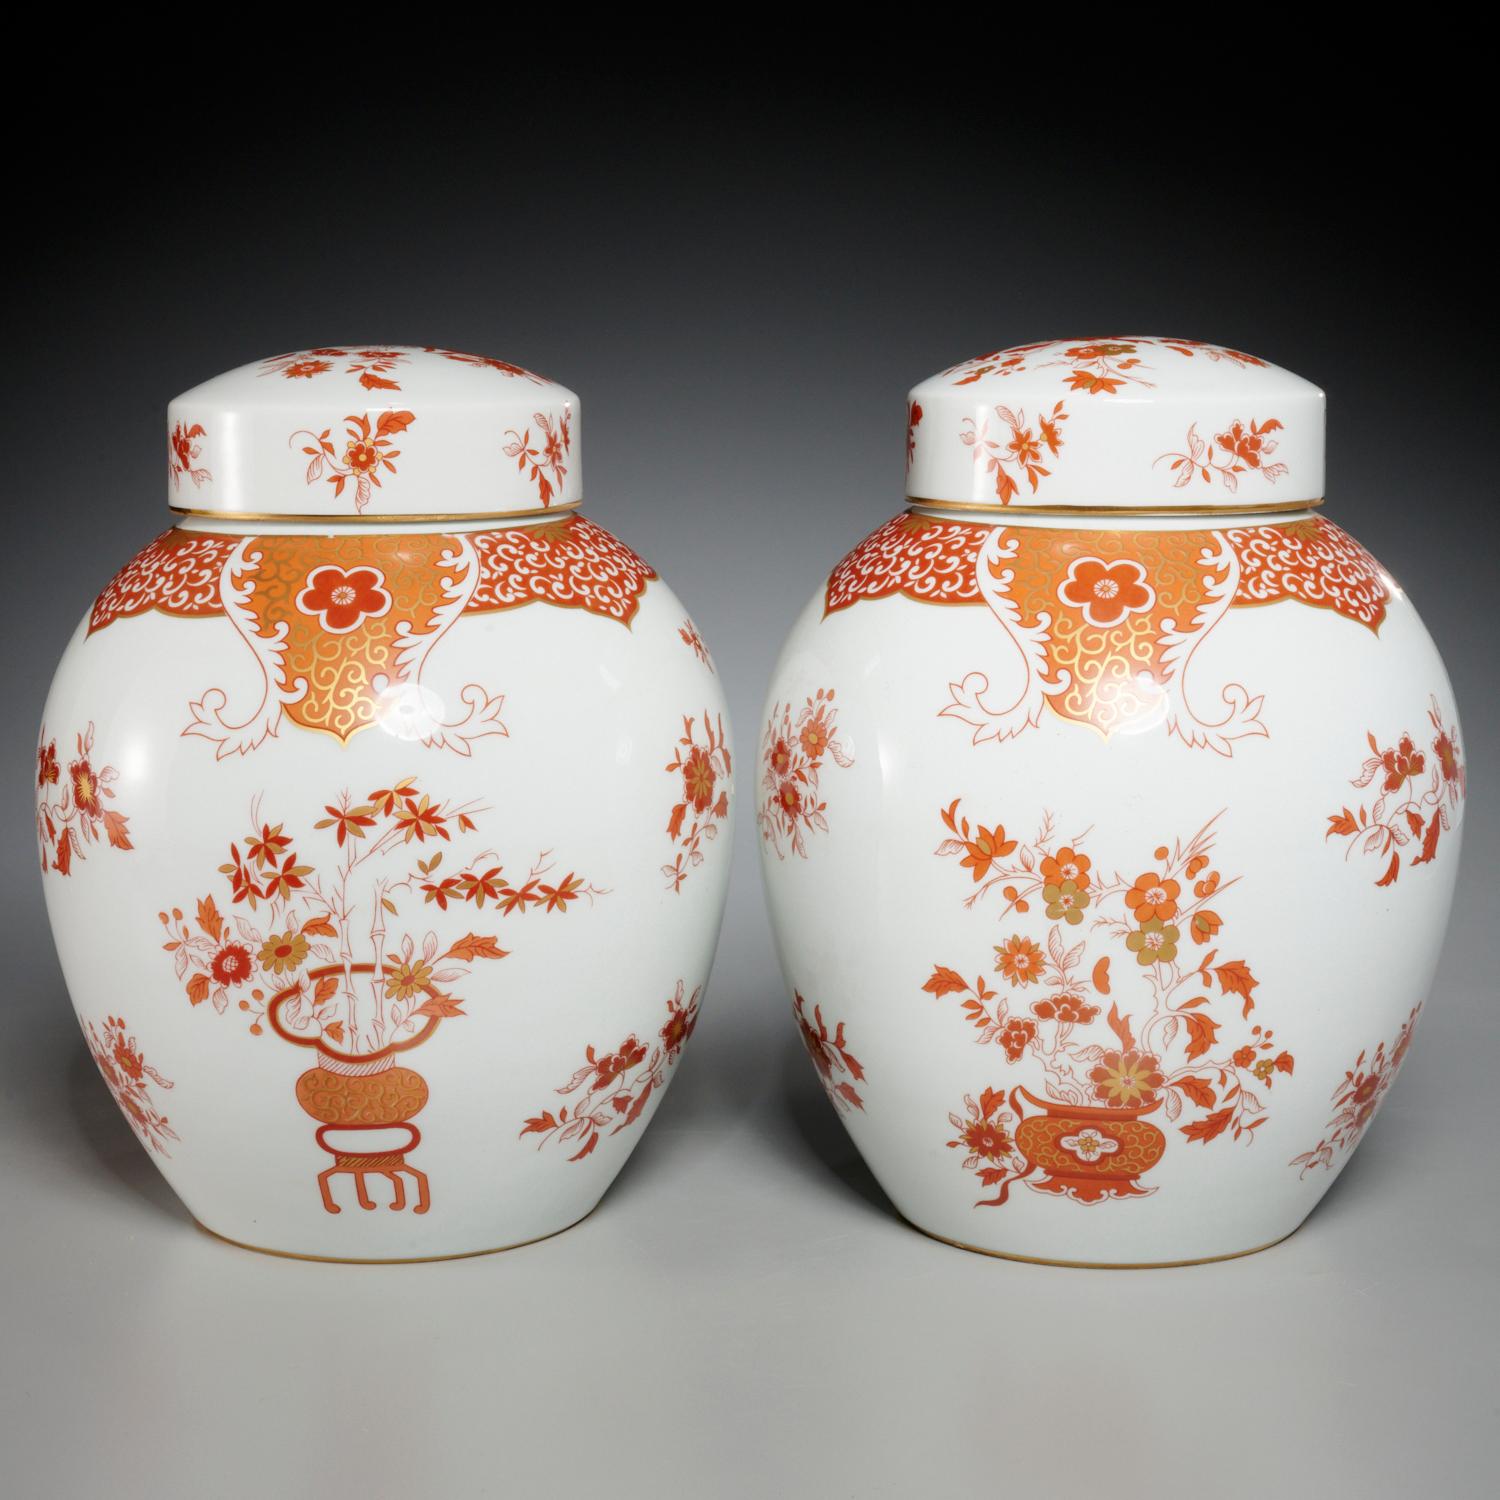 20th c., a pair of Japanese Kutani style porcelain lidded jars, stamped on Porcelaine de Paris underside of foot. The mark indicates the piece was produced in the 1970's. The jars are decorated in deep orange, tangerine and gold motifs on a white